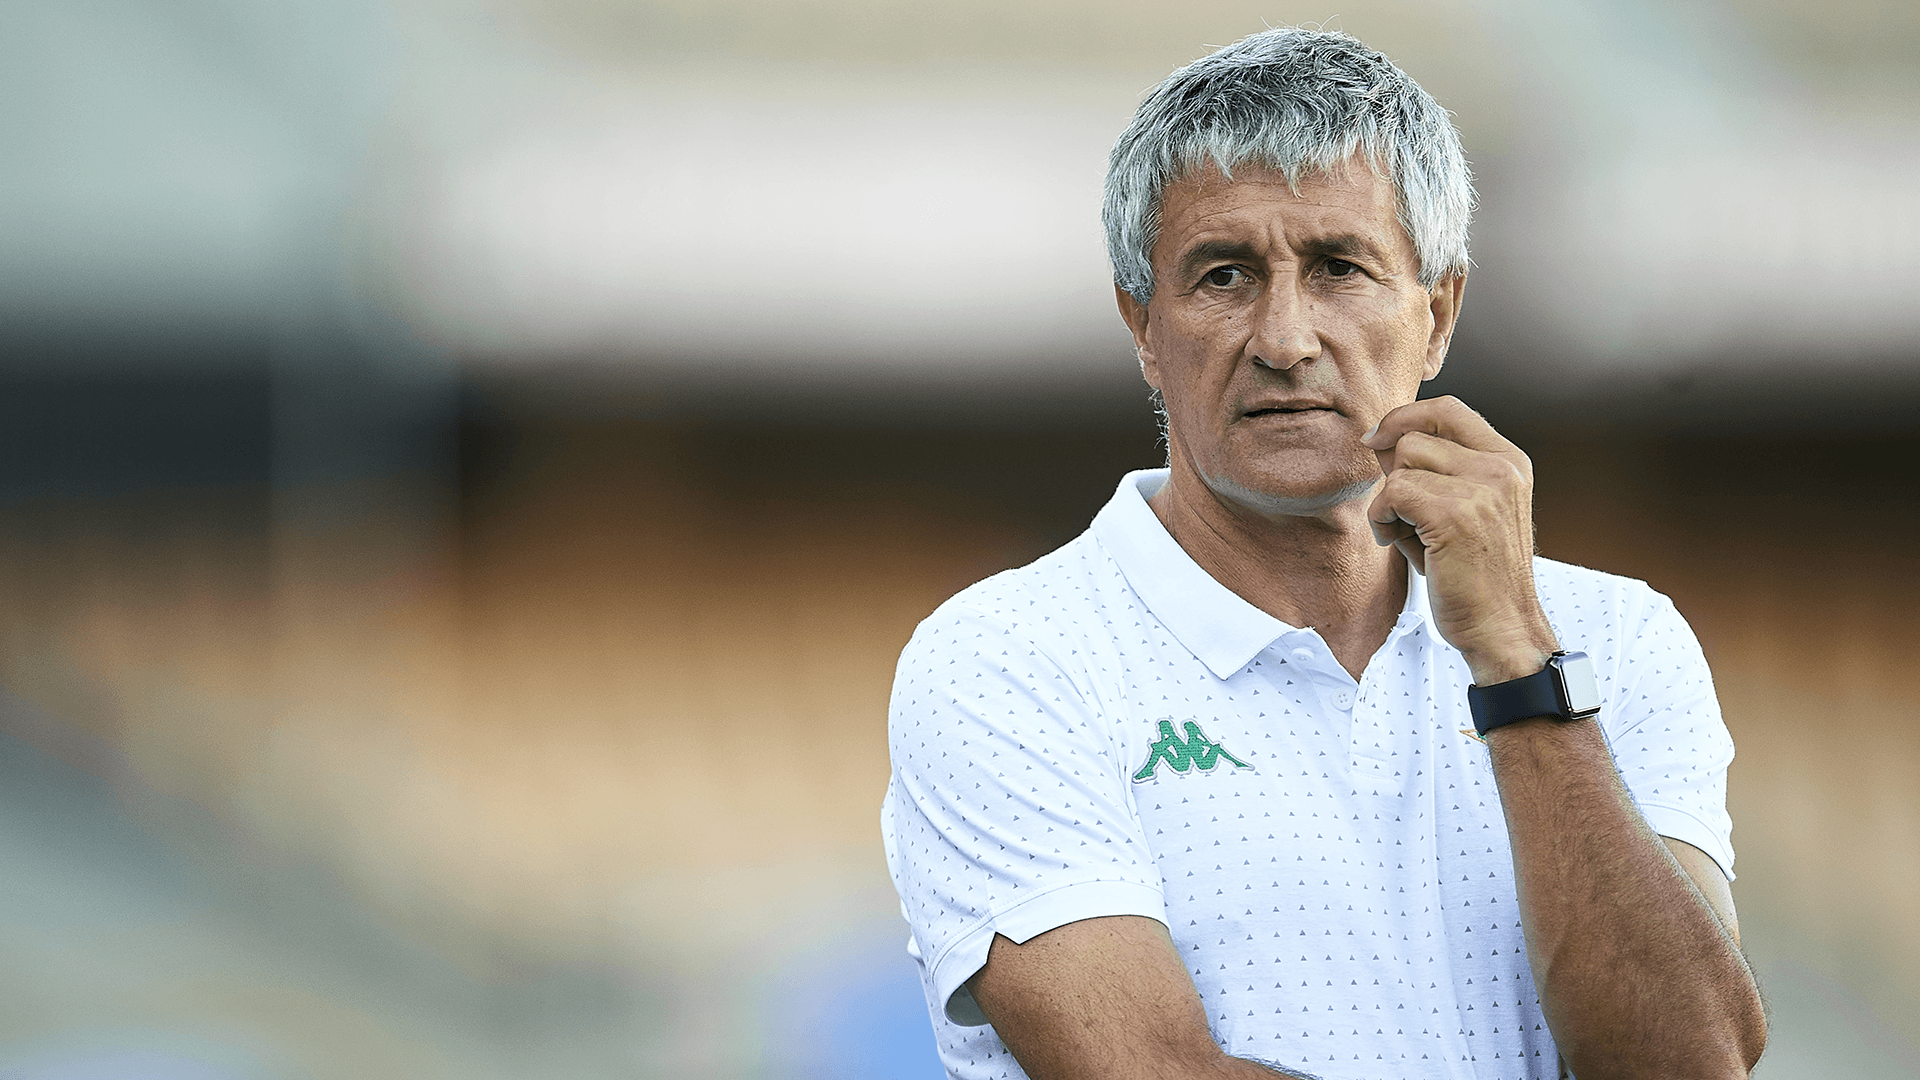 Barcelona's new coach: Who is Quique Setien? The Cruyff